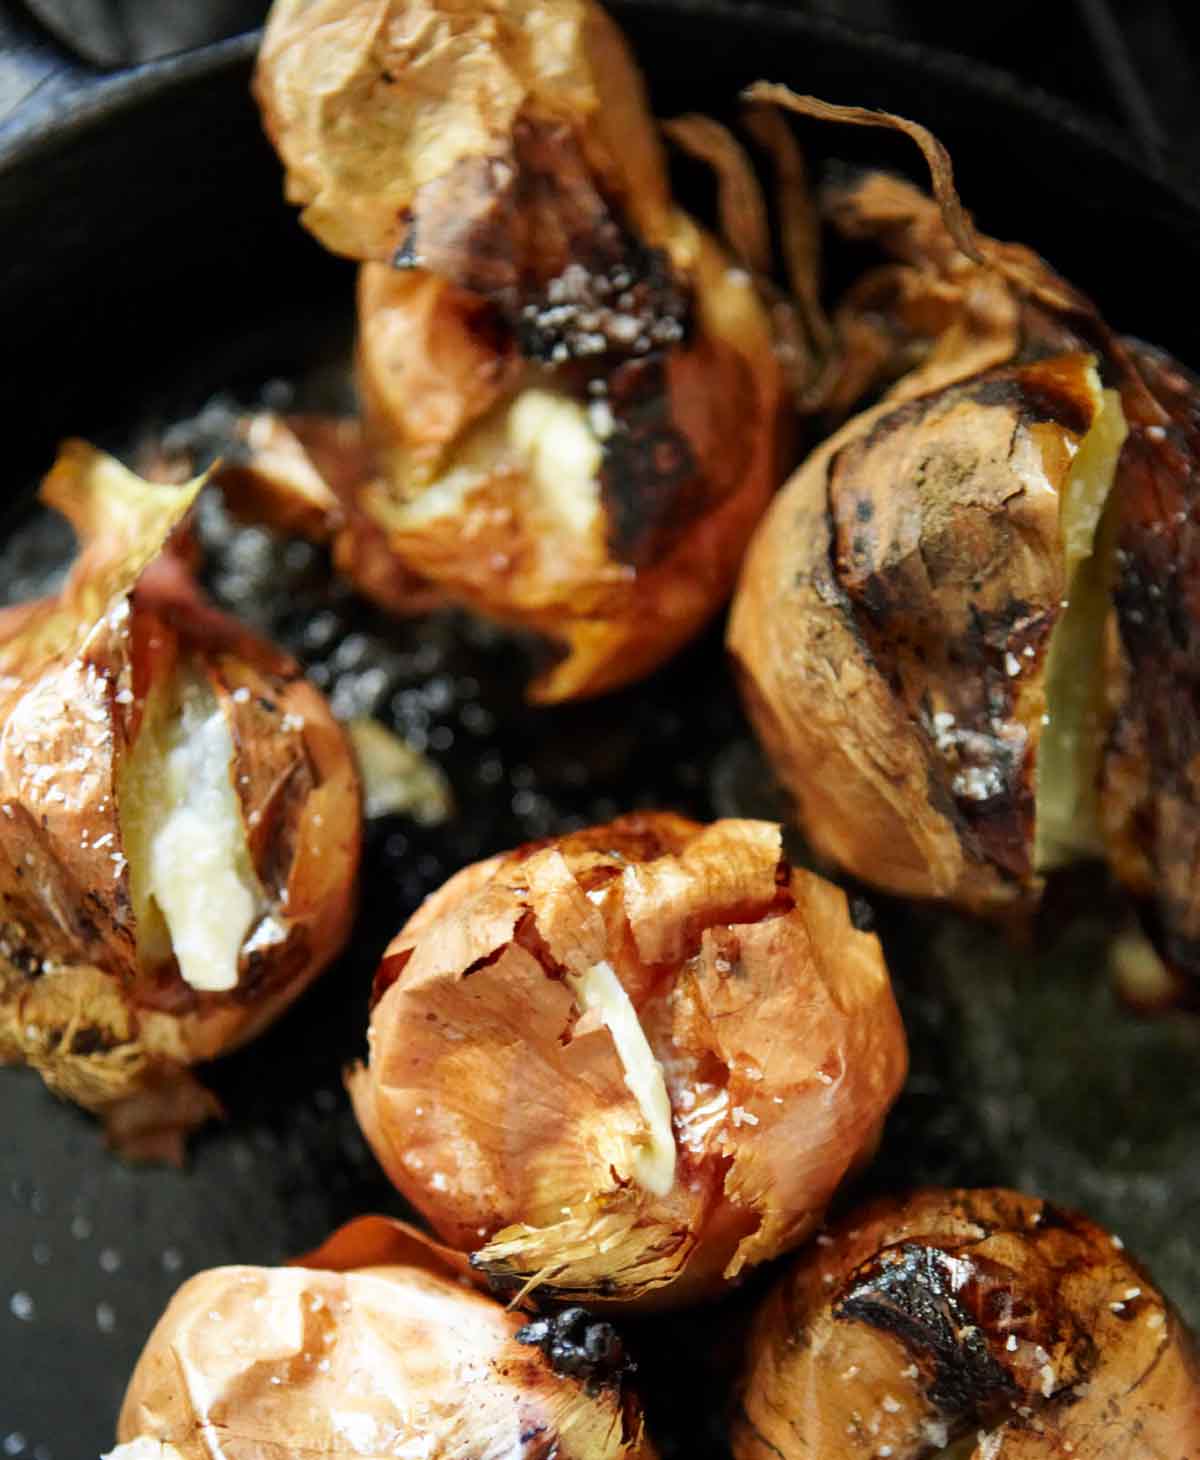 A cast-iron skillet with 8 whole roasted onions with papery skins and creamy interiors.